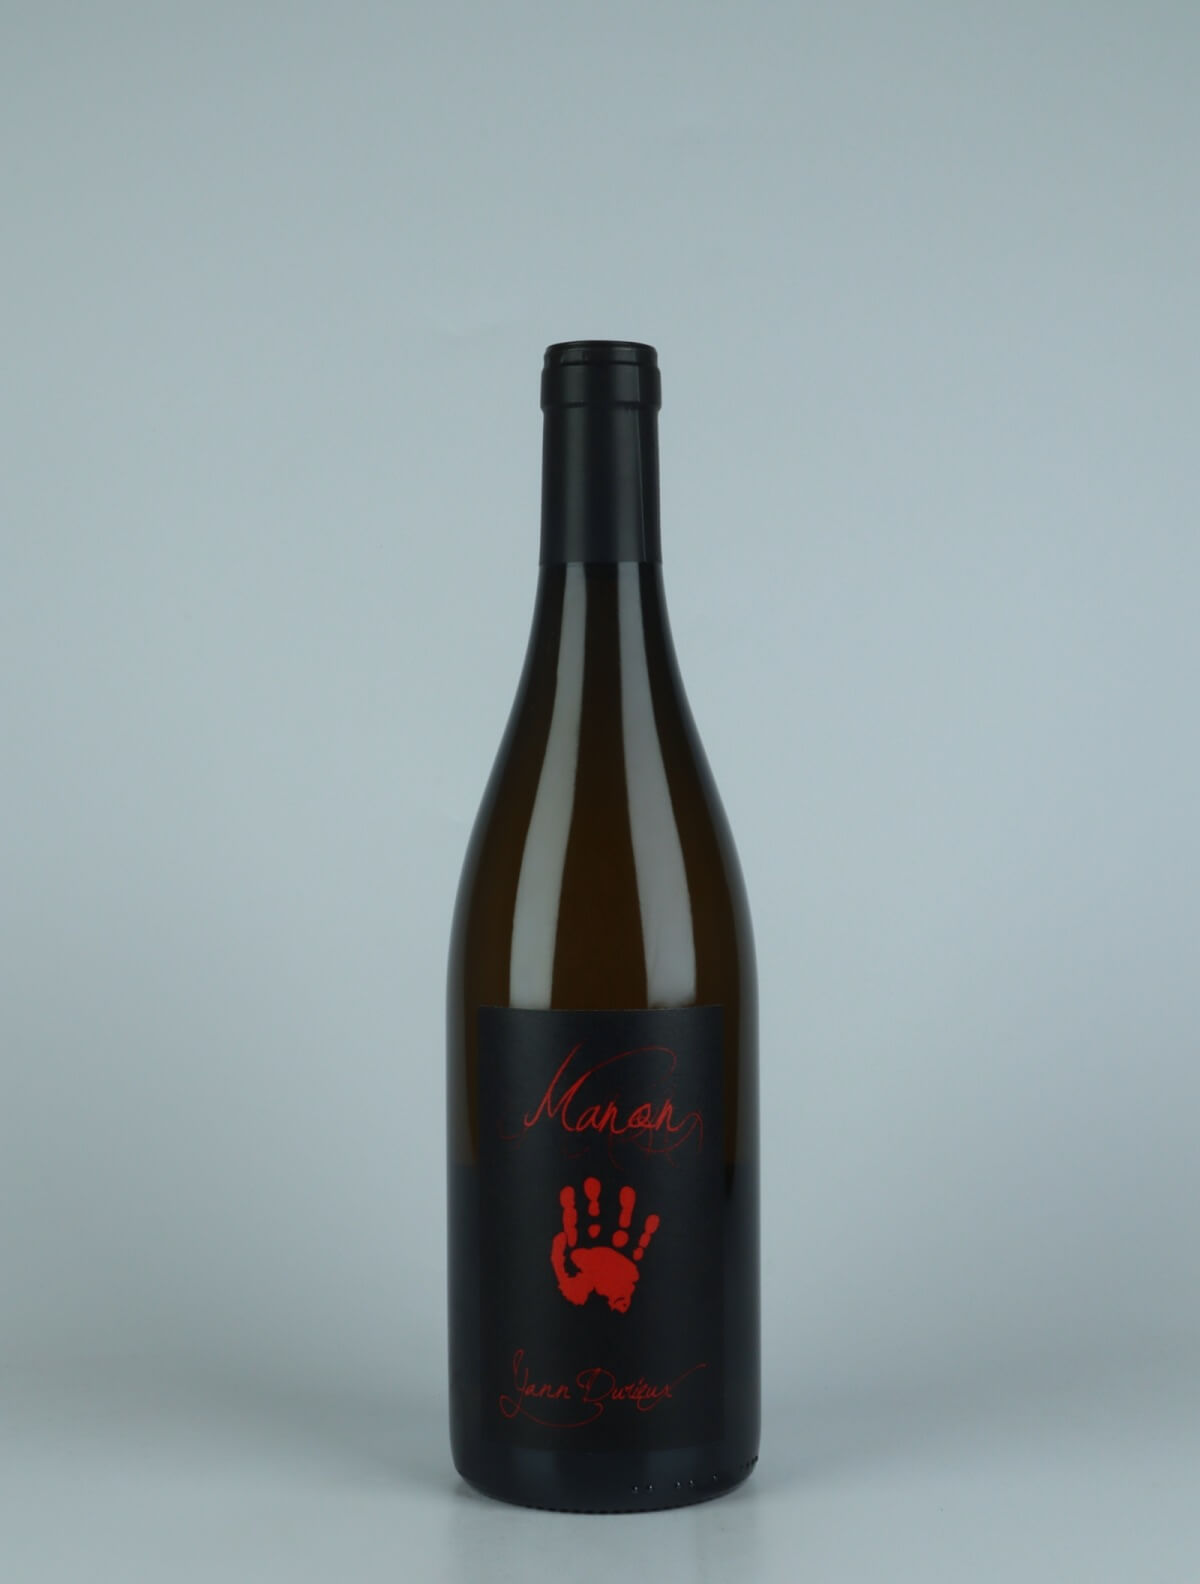 A bottle 2019 Manon White wine from Yann Durieux, Burgundy in France